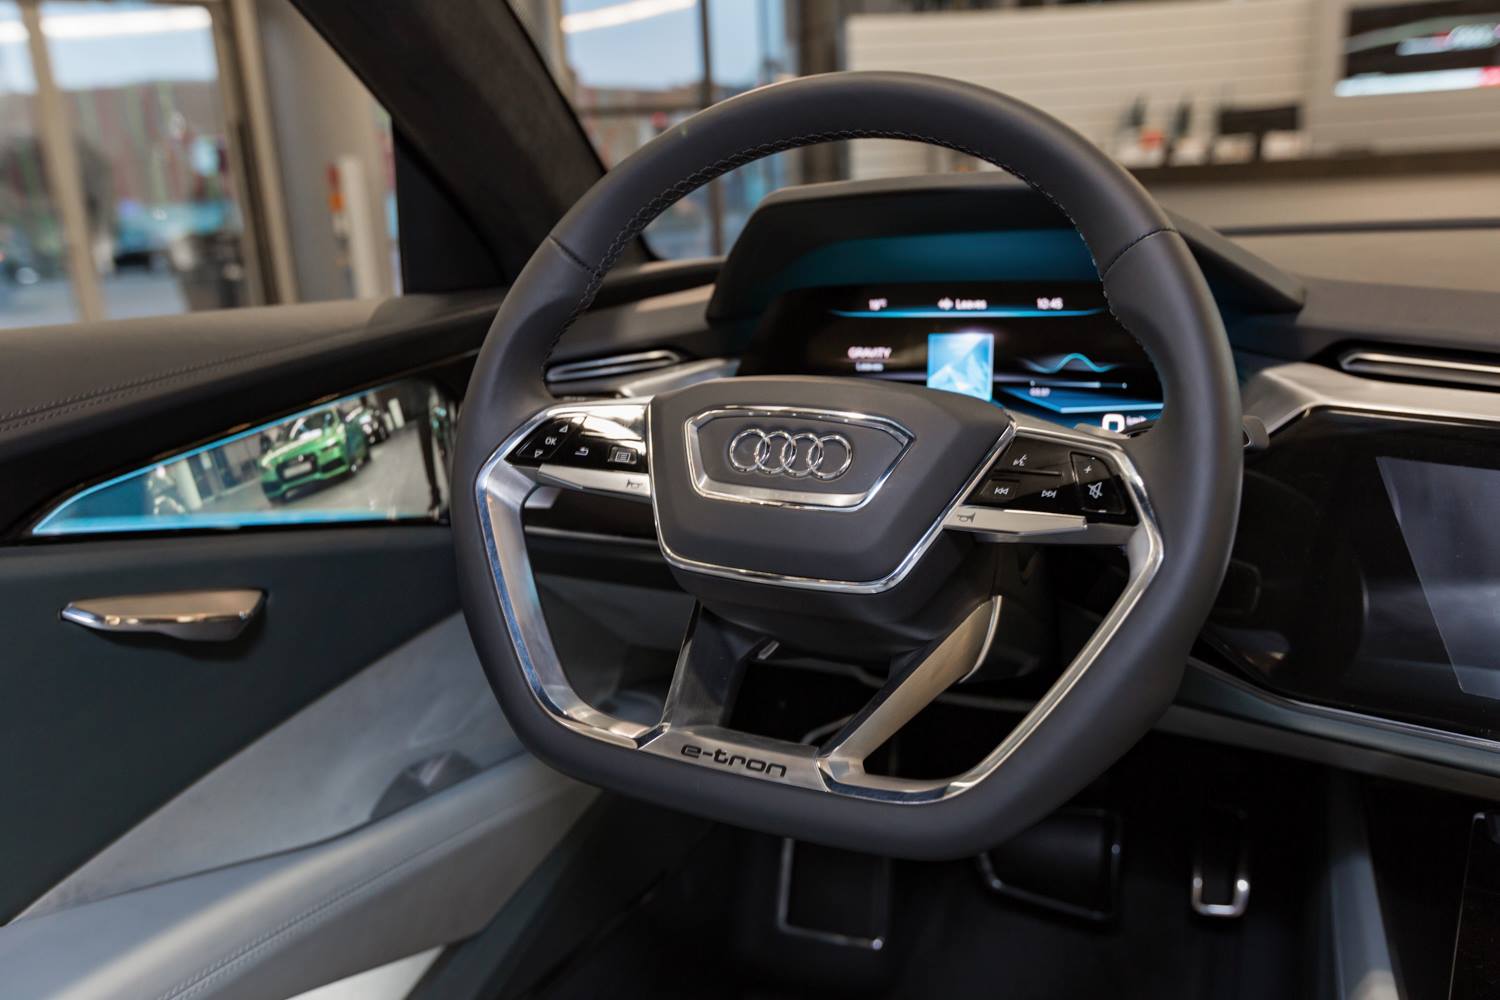 Audi to Offer Cameras Instead of Regular Side Mirrors in E-Tron